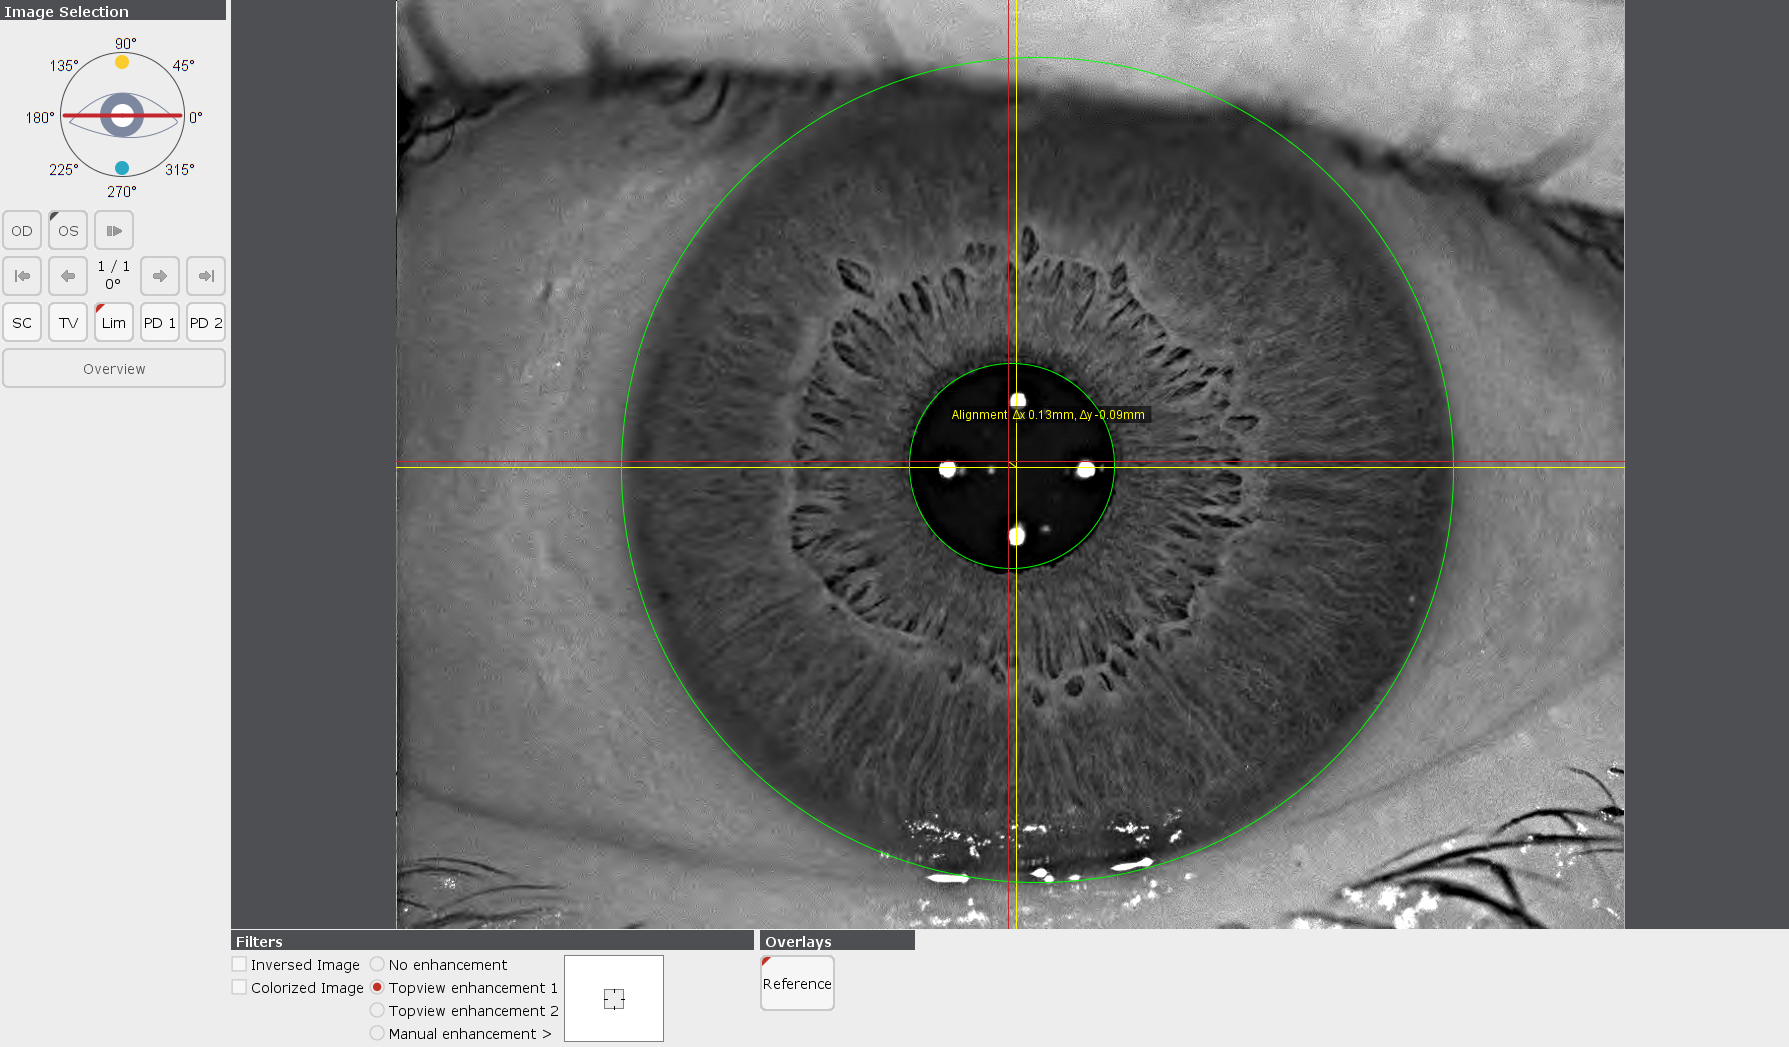 The TopView image in vibrant colors and with high contrast improves the visualization of details such as blood vessels, iris pattern and pupil.